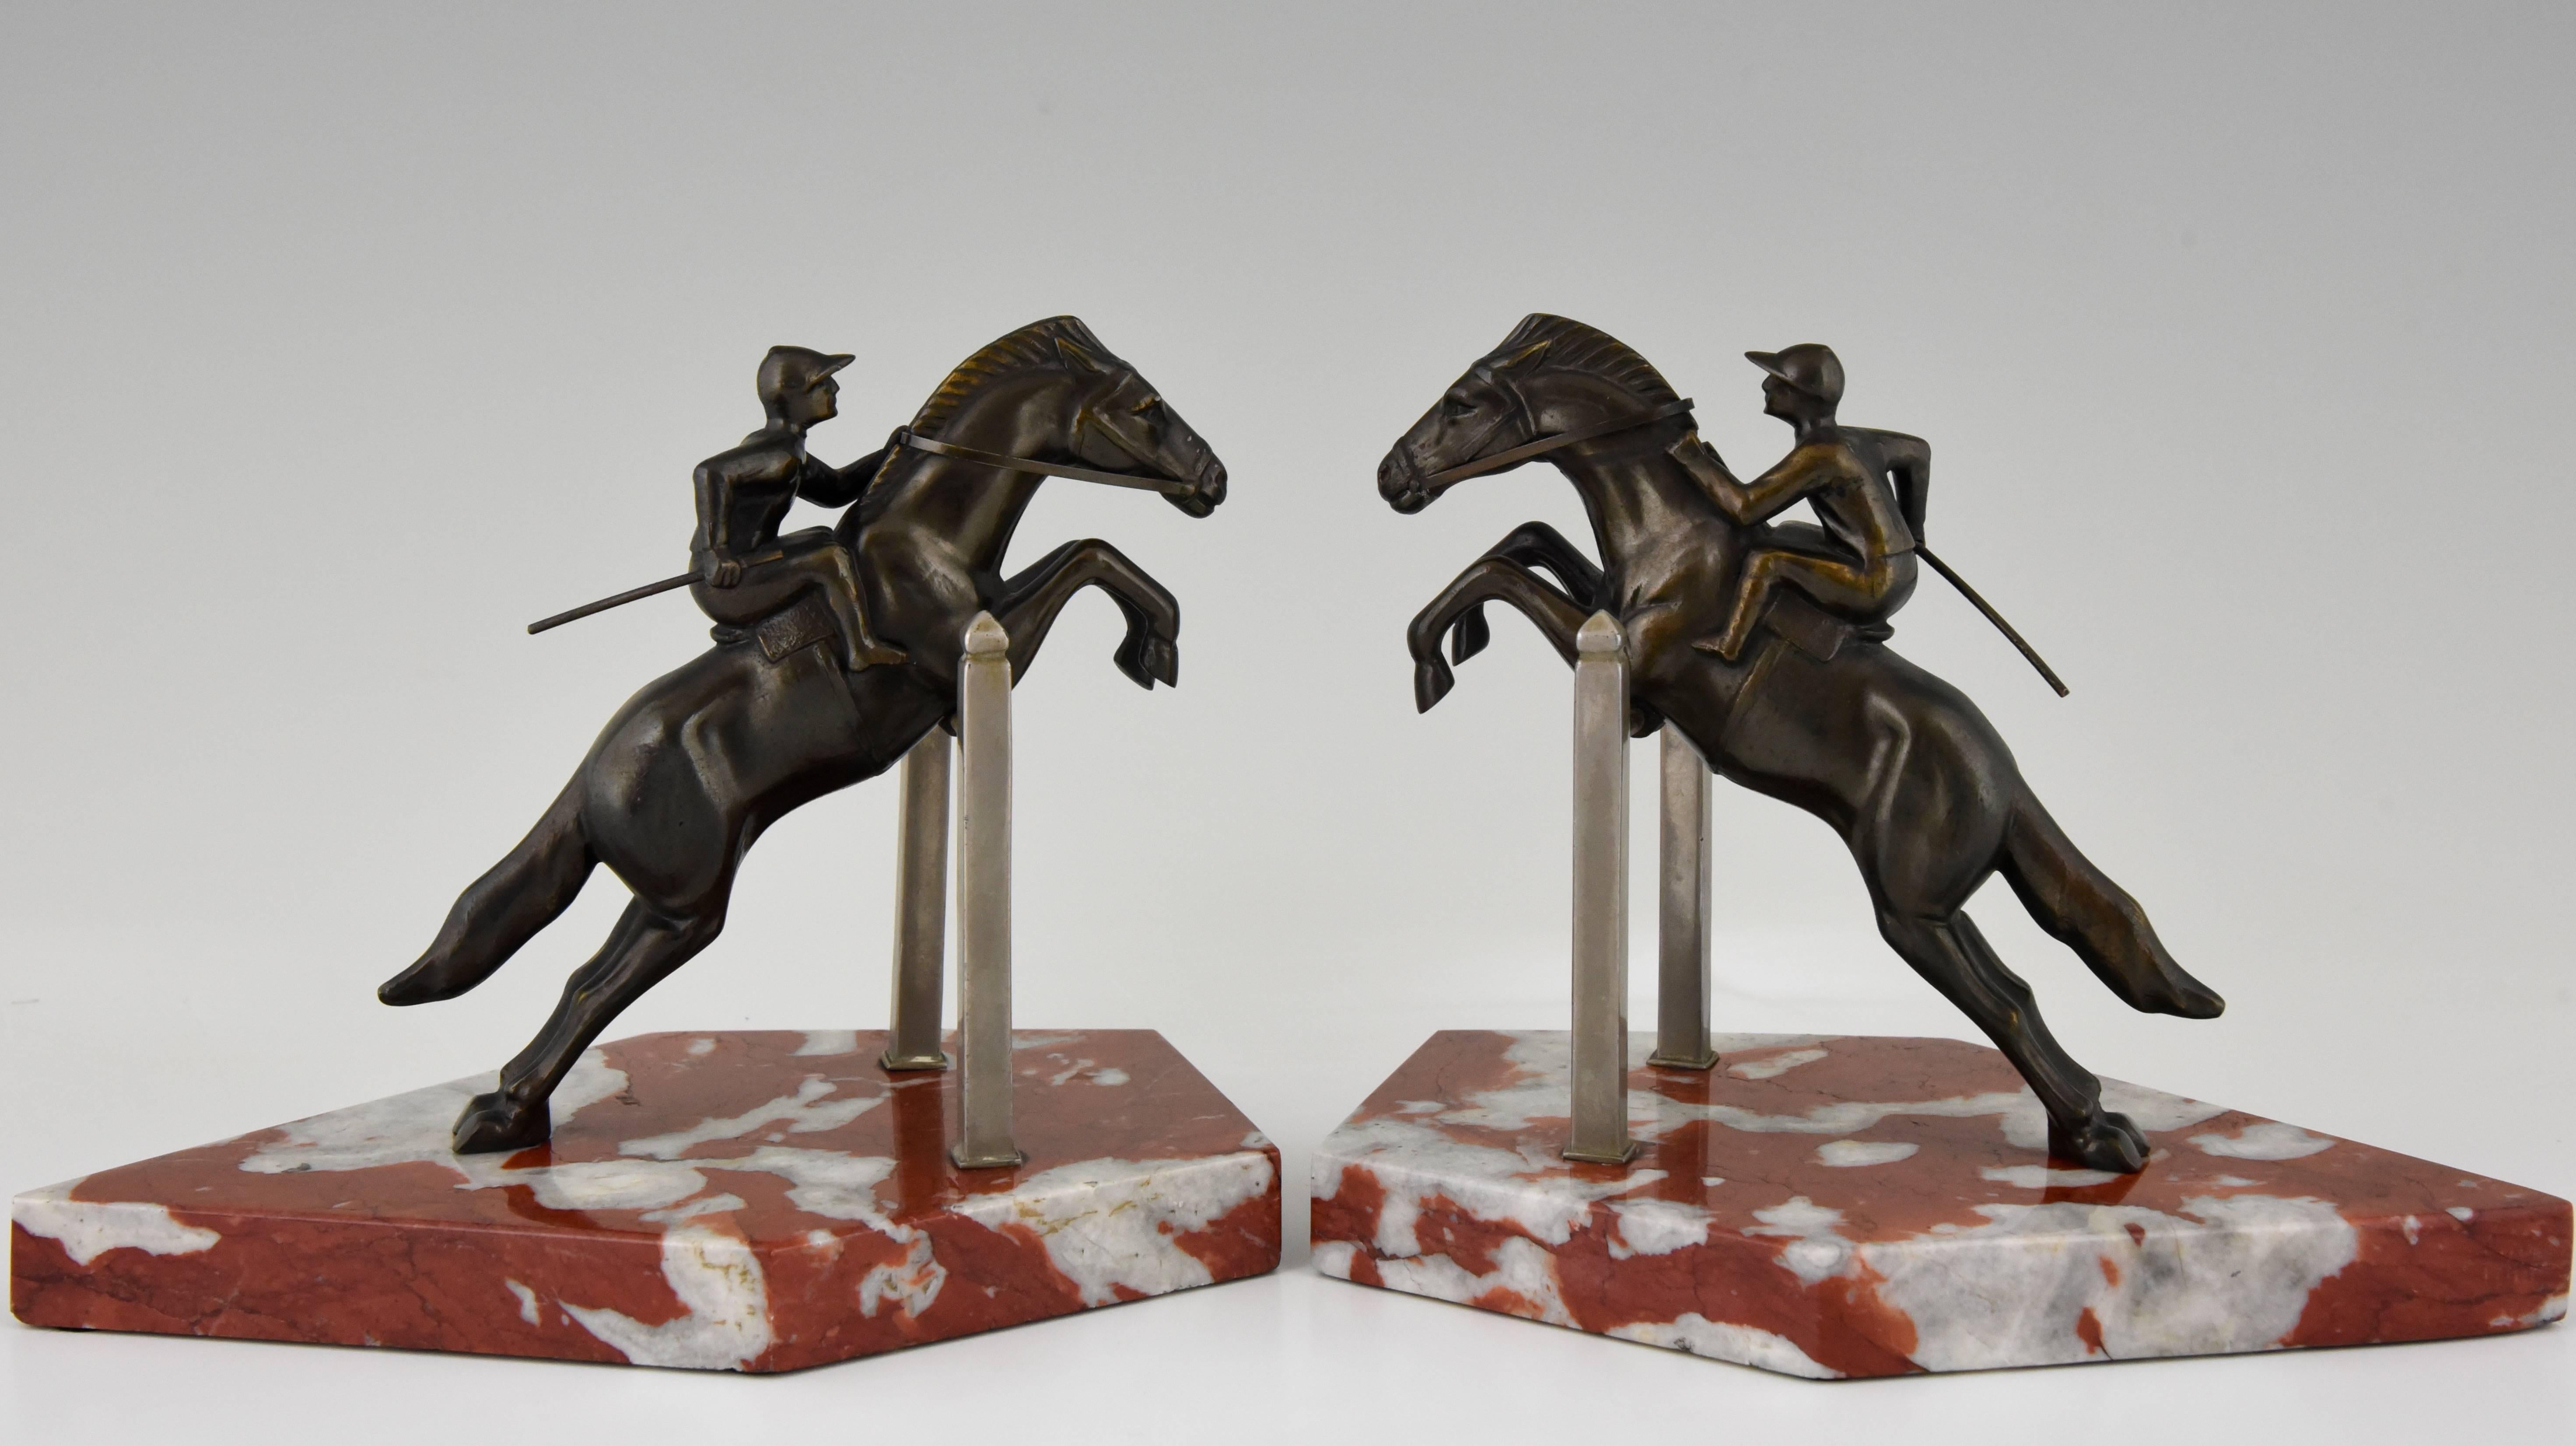 20th Century Art Deco Jockey Bookends on Jumping Horse, 1930 France